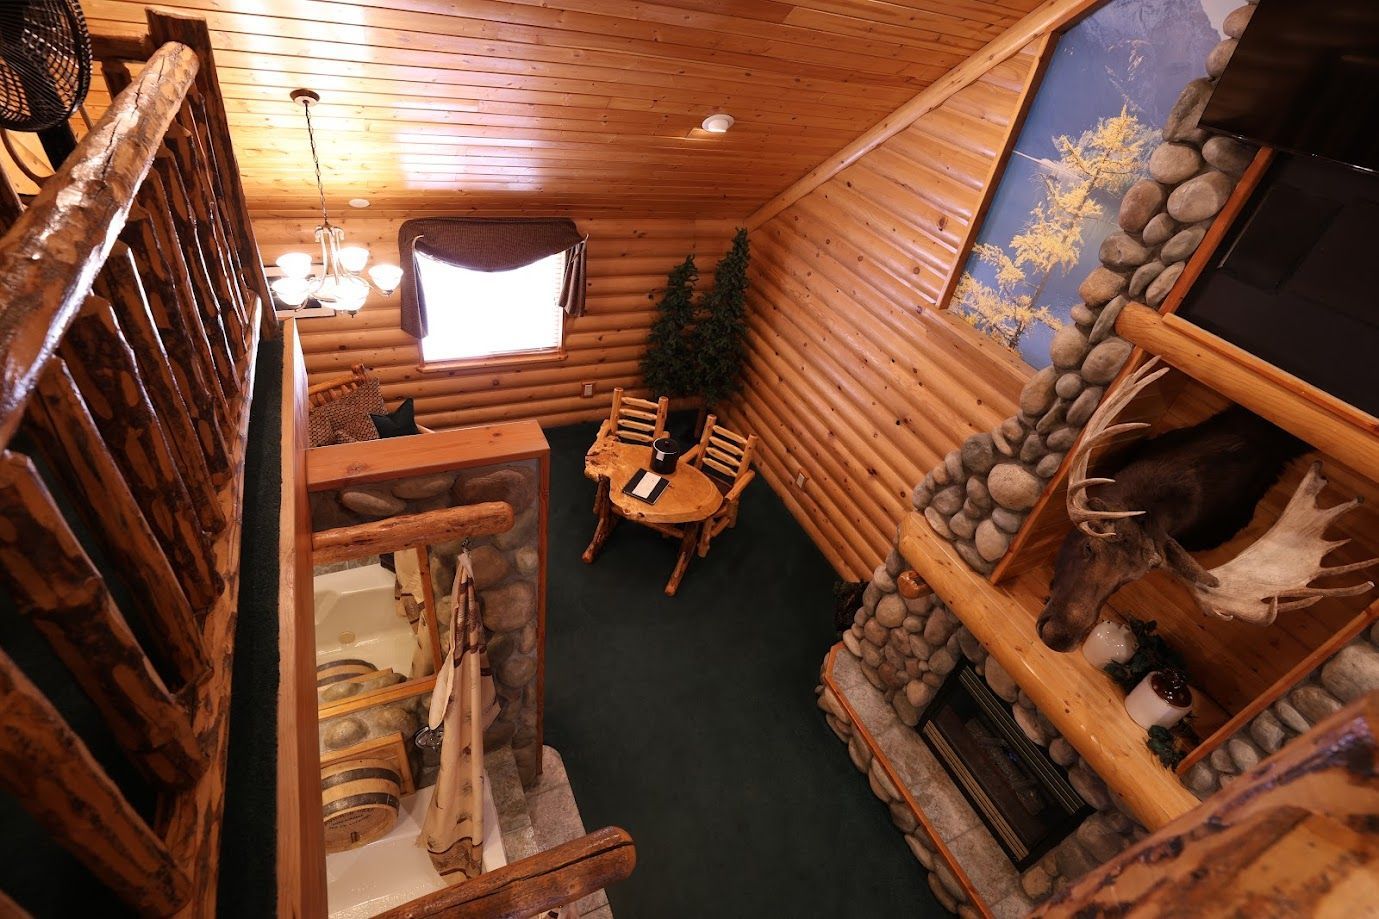 An aerial view of a log cabin with a fireplace and stairs